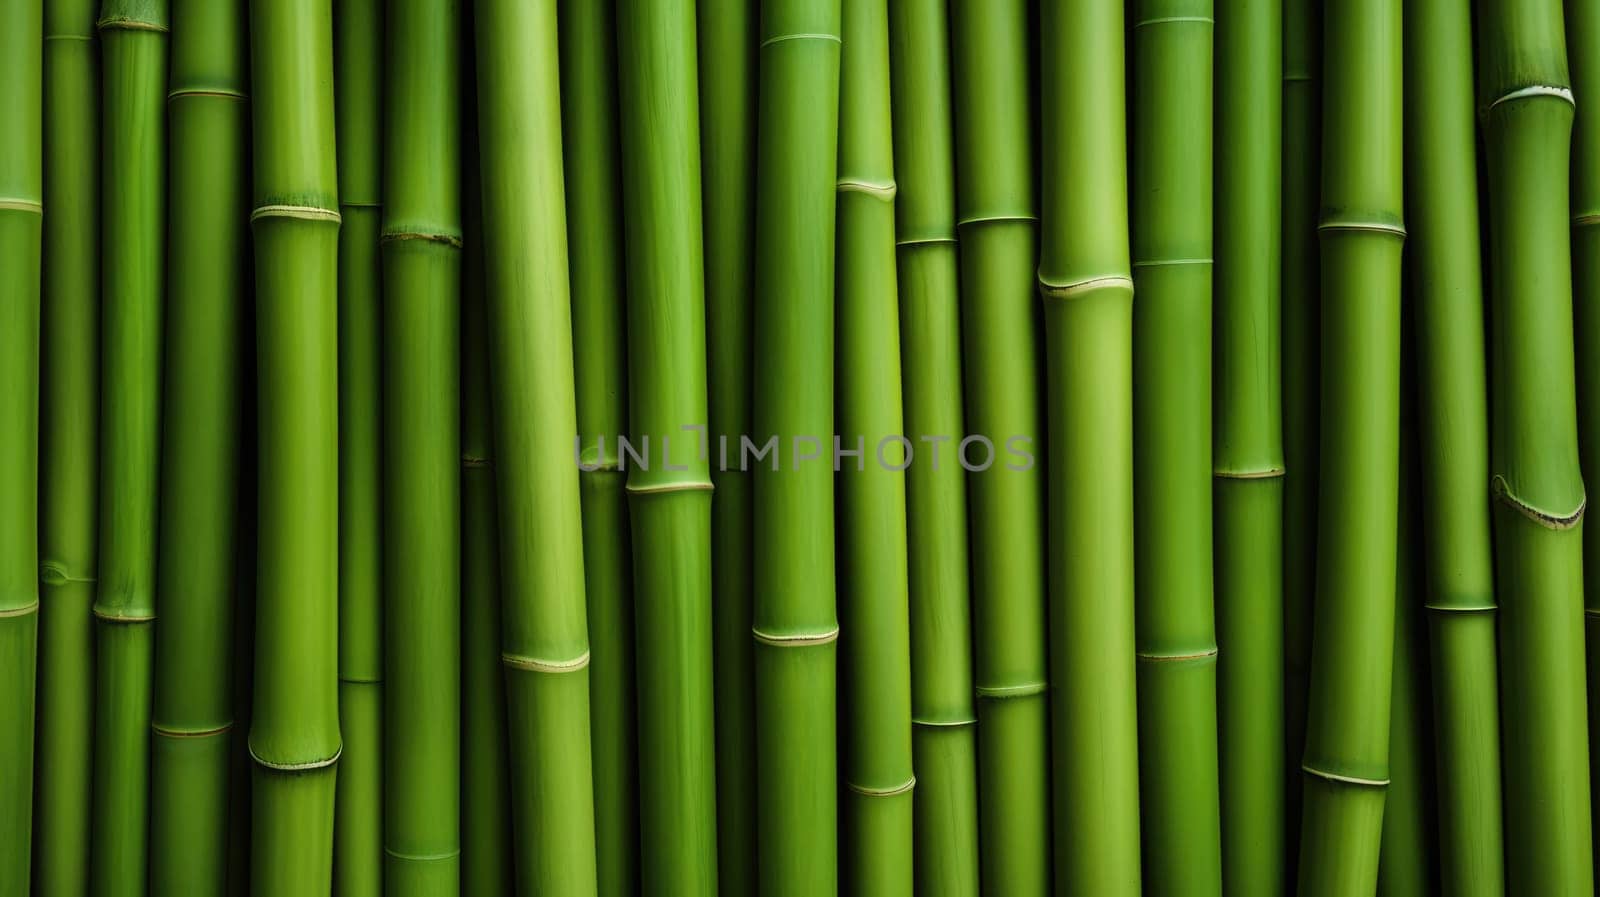 Green bamboo fence texture, bamboo background by natali_brill